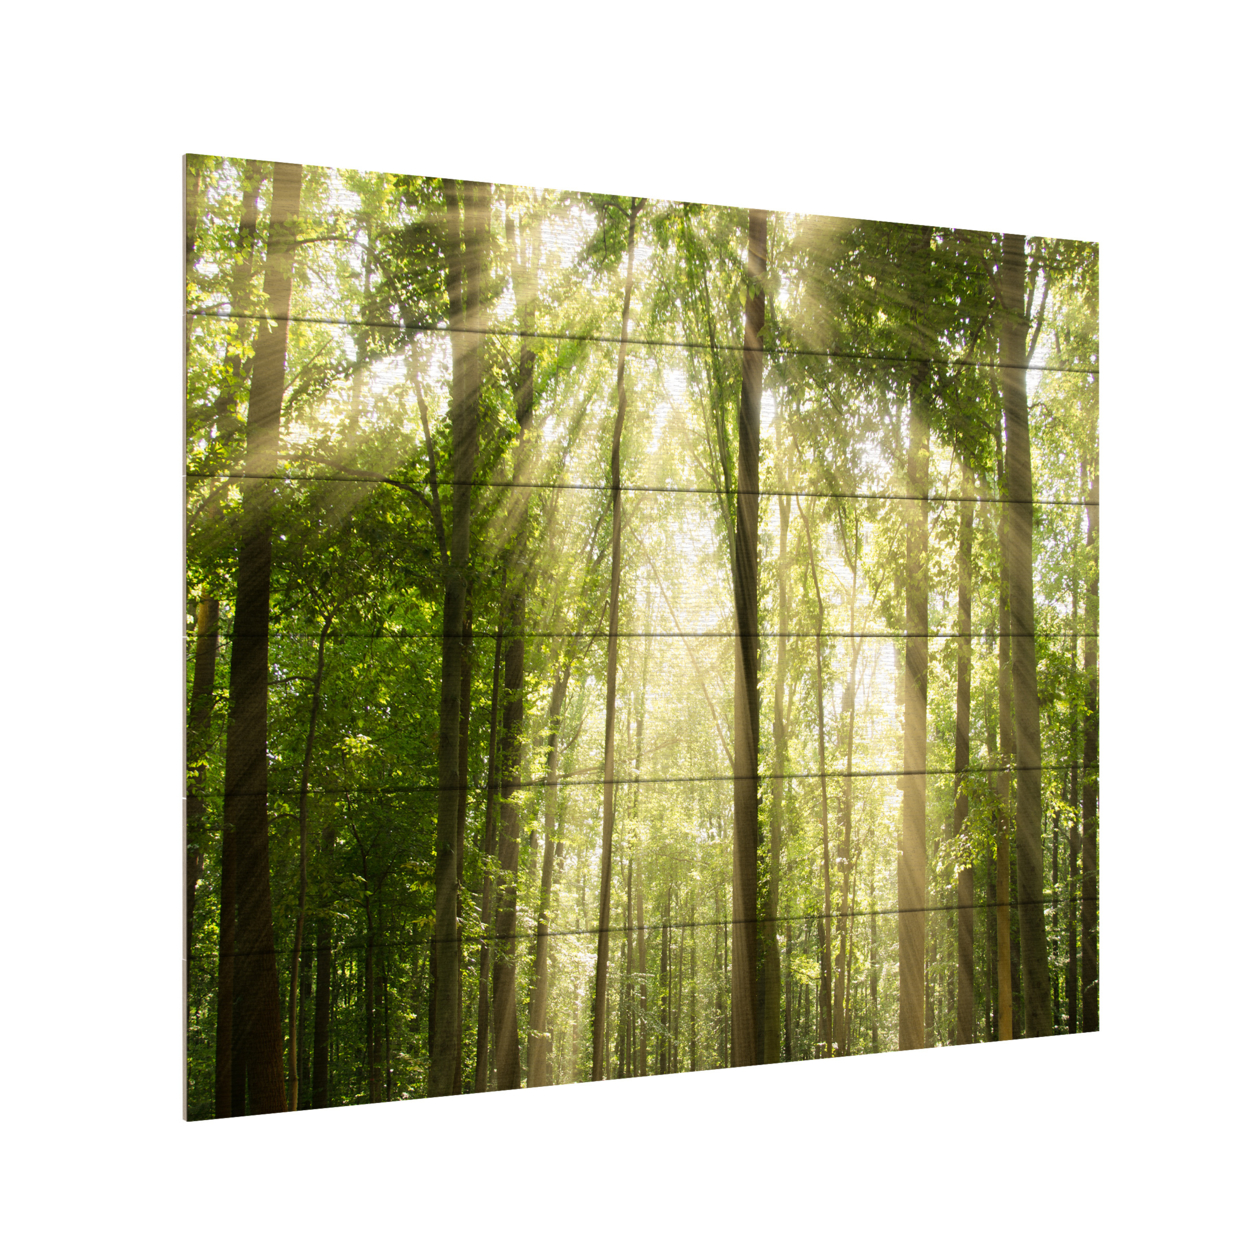 Wooden Slat Art 18 X 22 Inches Titled Sunrays Through Treetops Ready To Hang Home Decor Picture